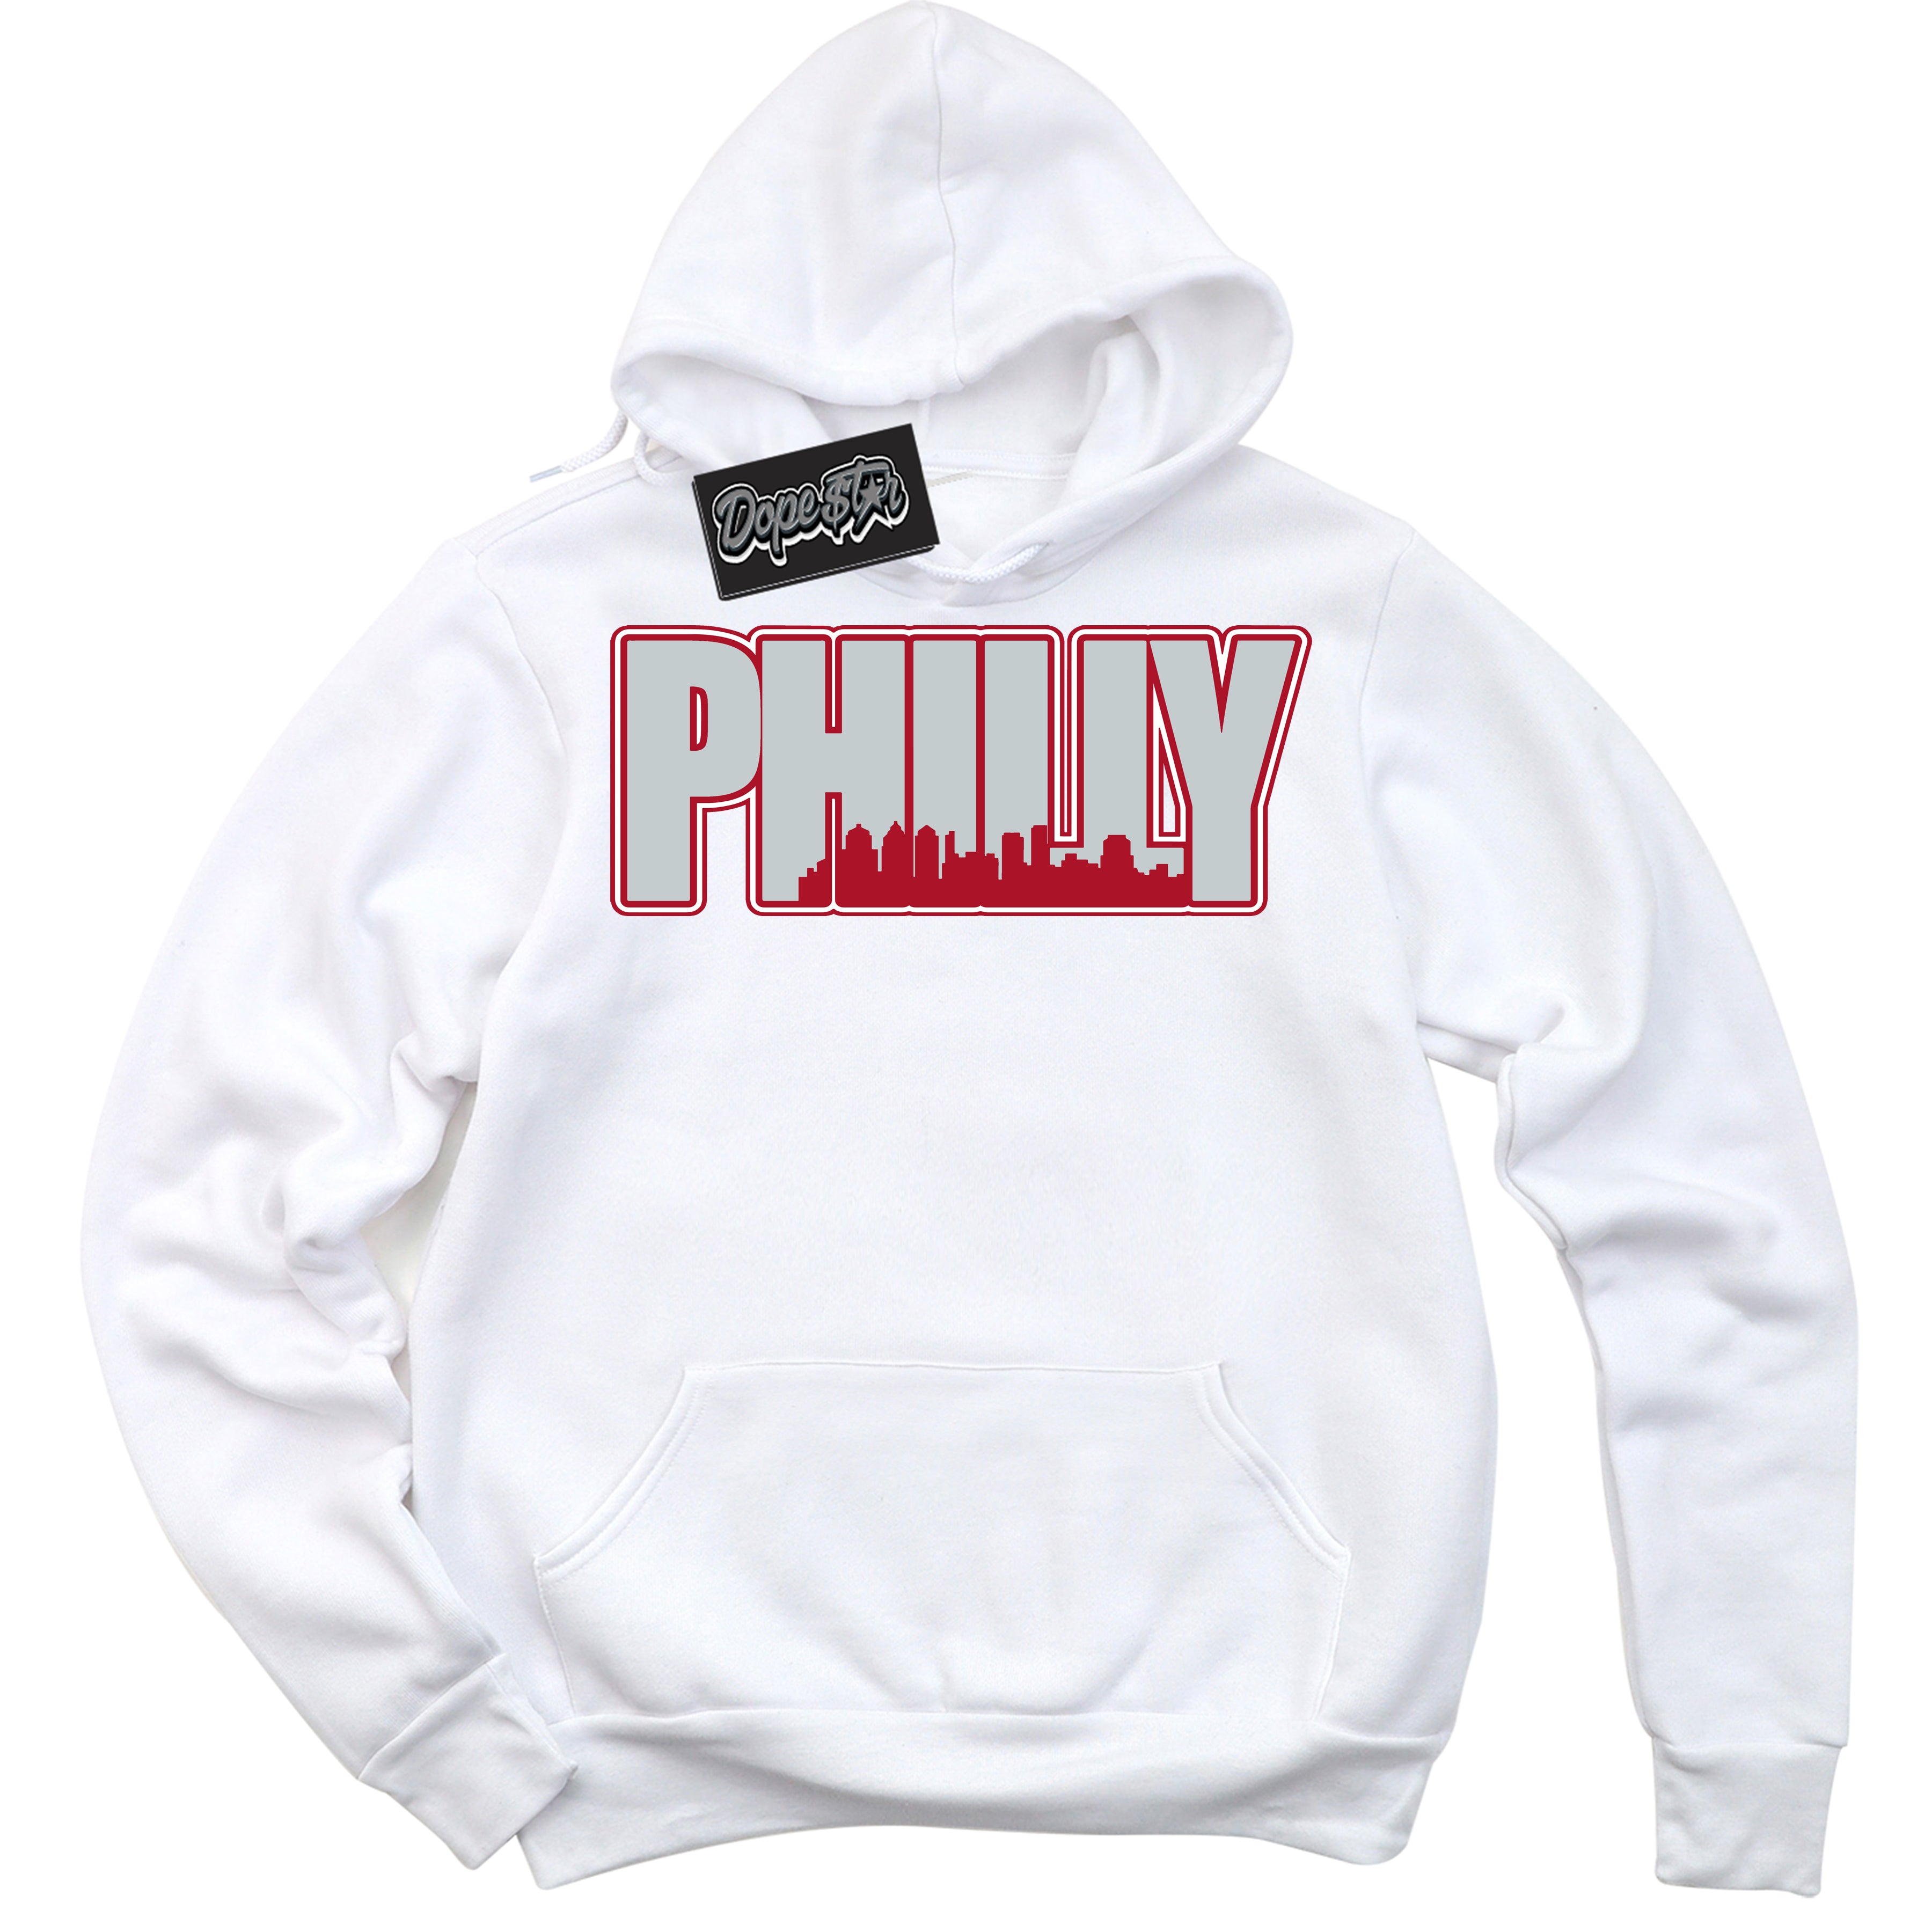 Cool White  Hoodie with “ Philly ”  design that Perfectly Matches  Reverse Ultraman Sneakers.